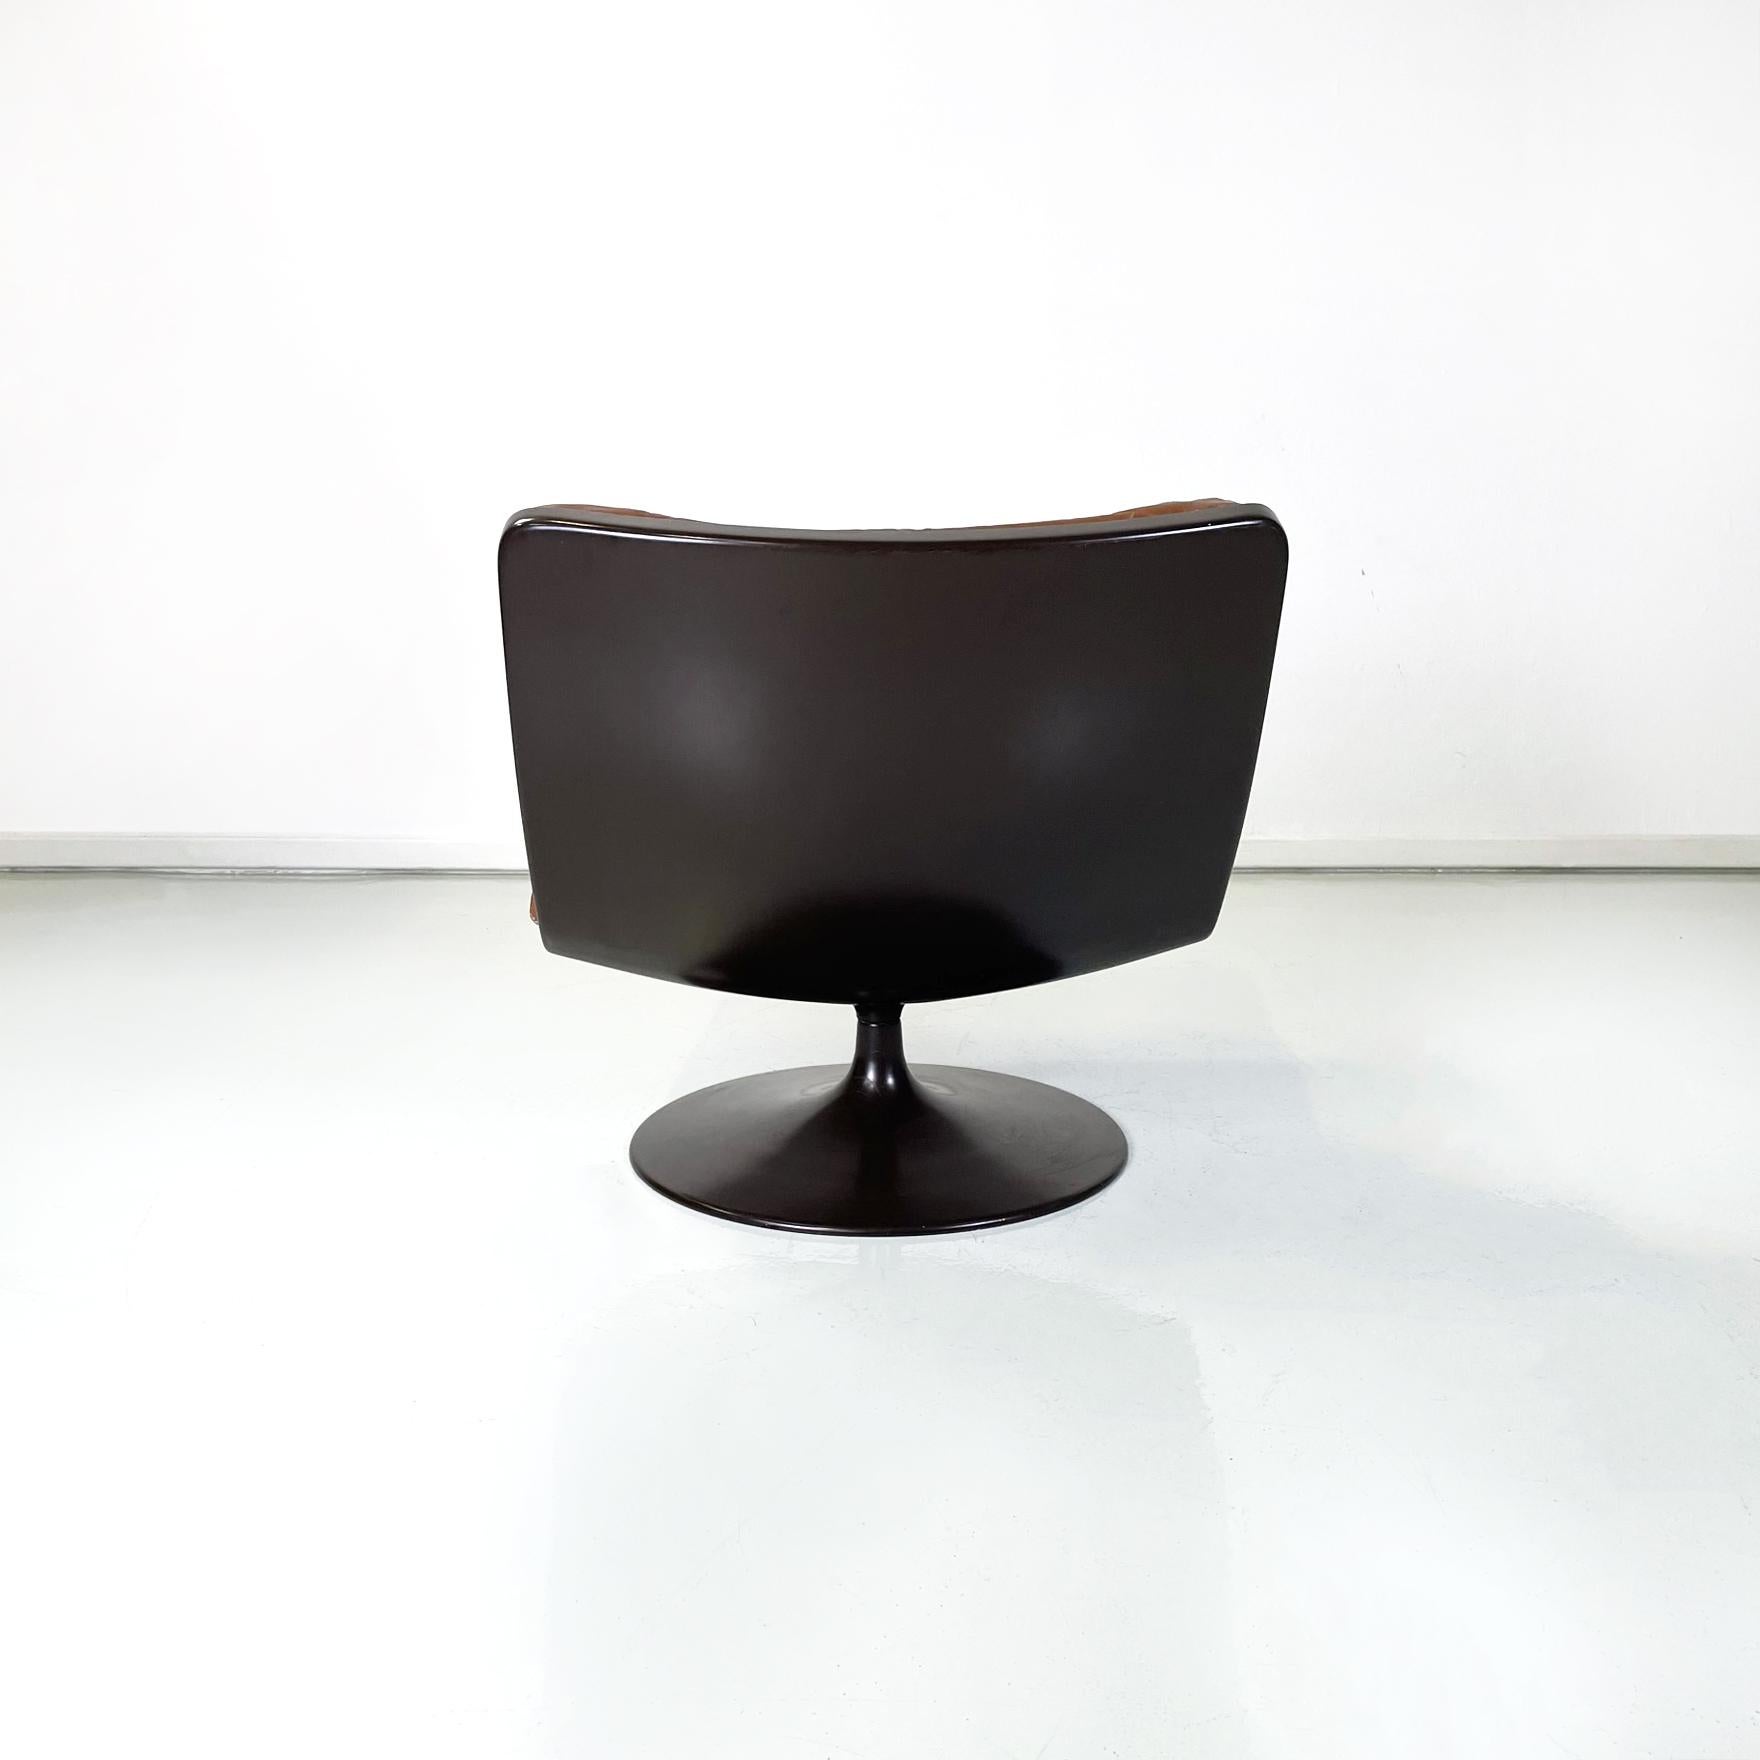 Italian Space Age Armchair in Brown Leather and Black Plastic by Play, 1970s For Sale 1